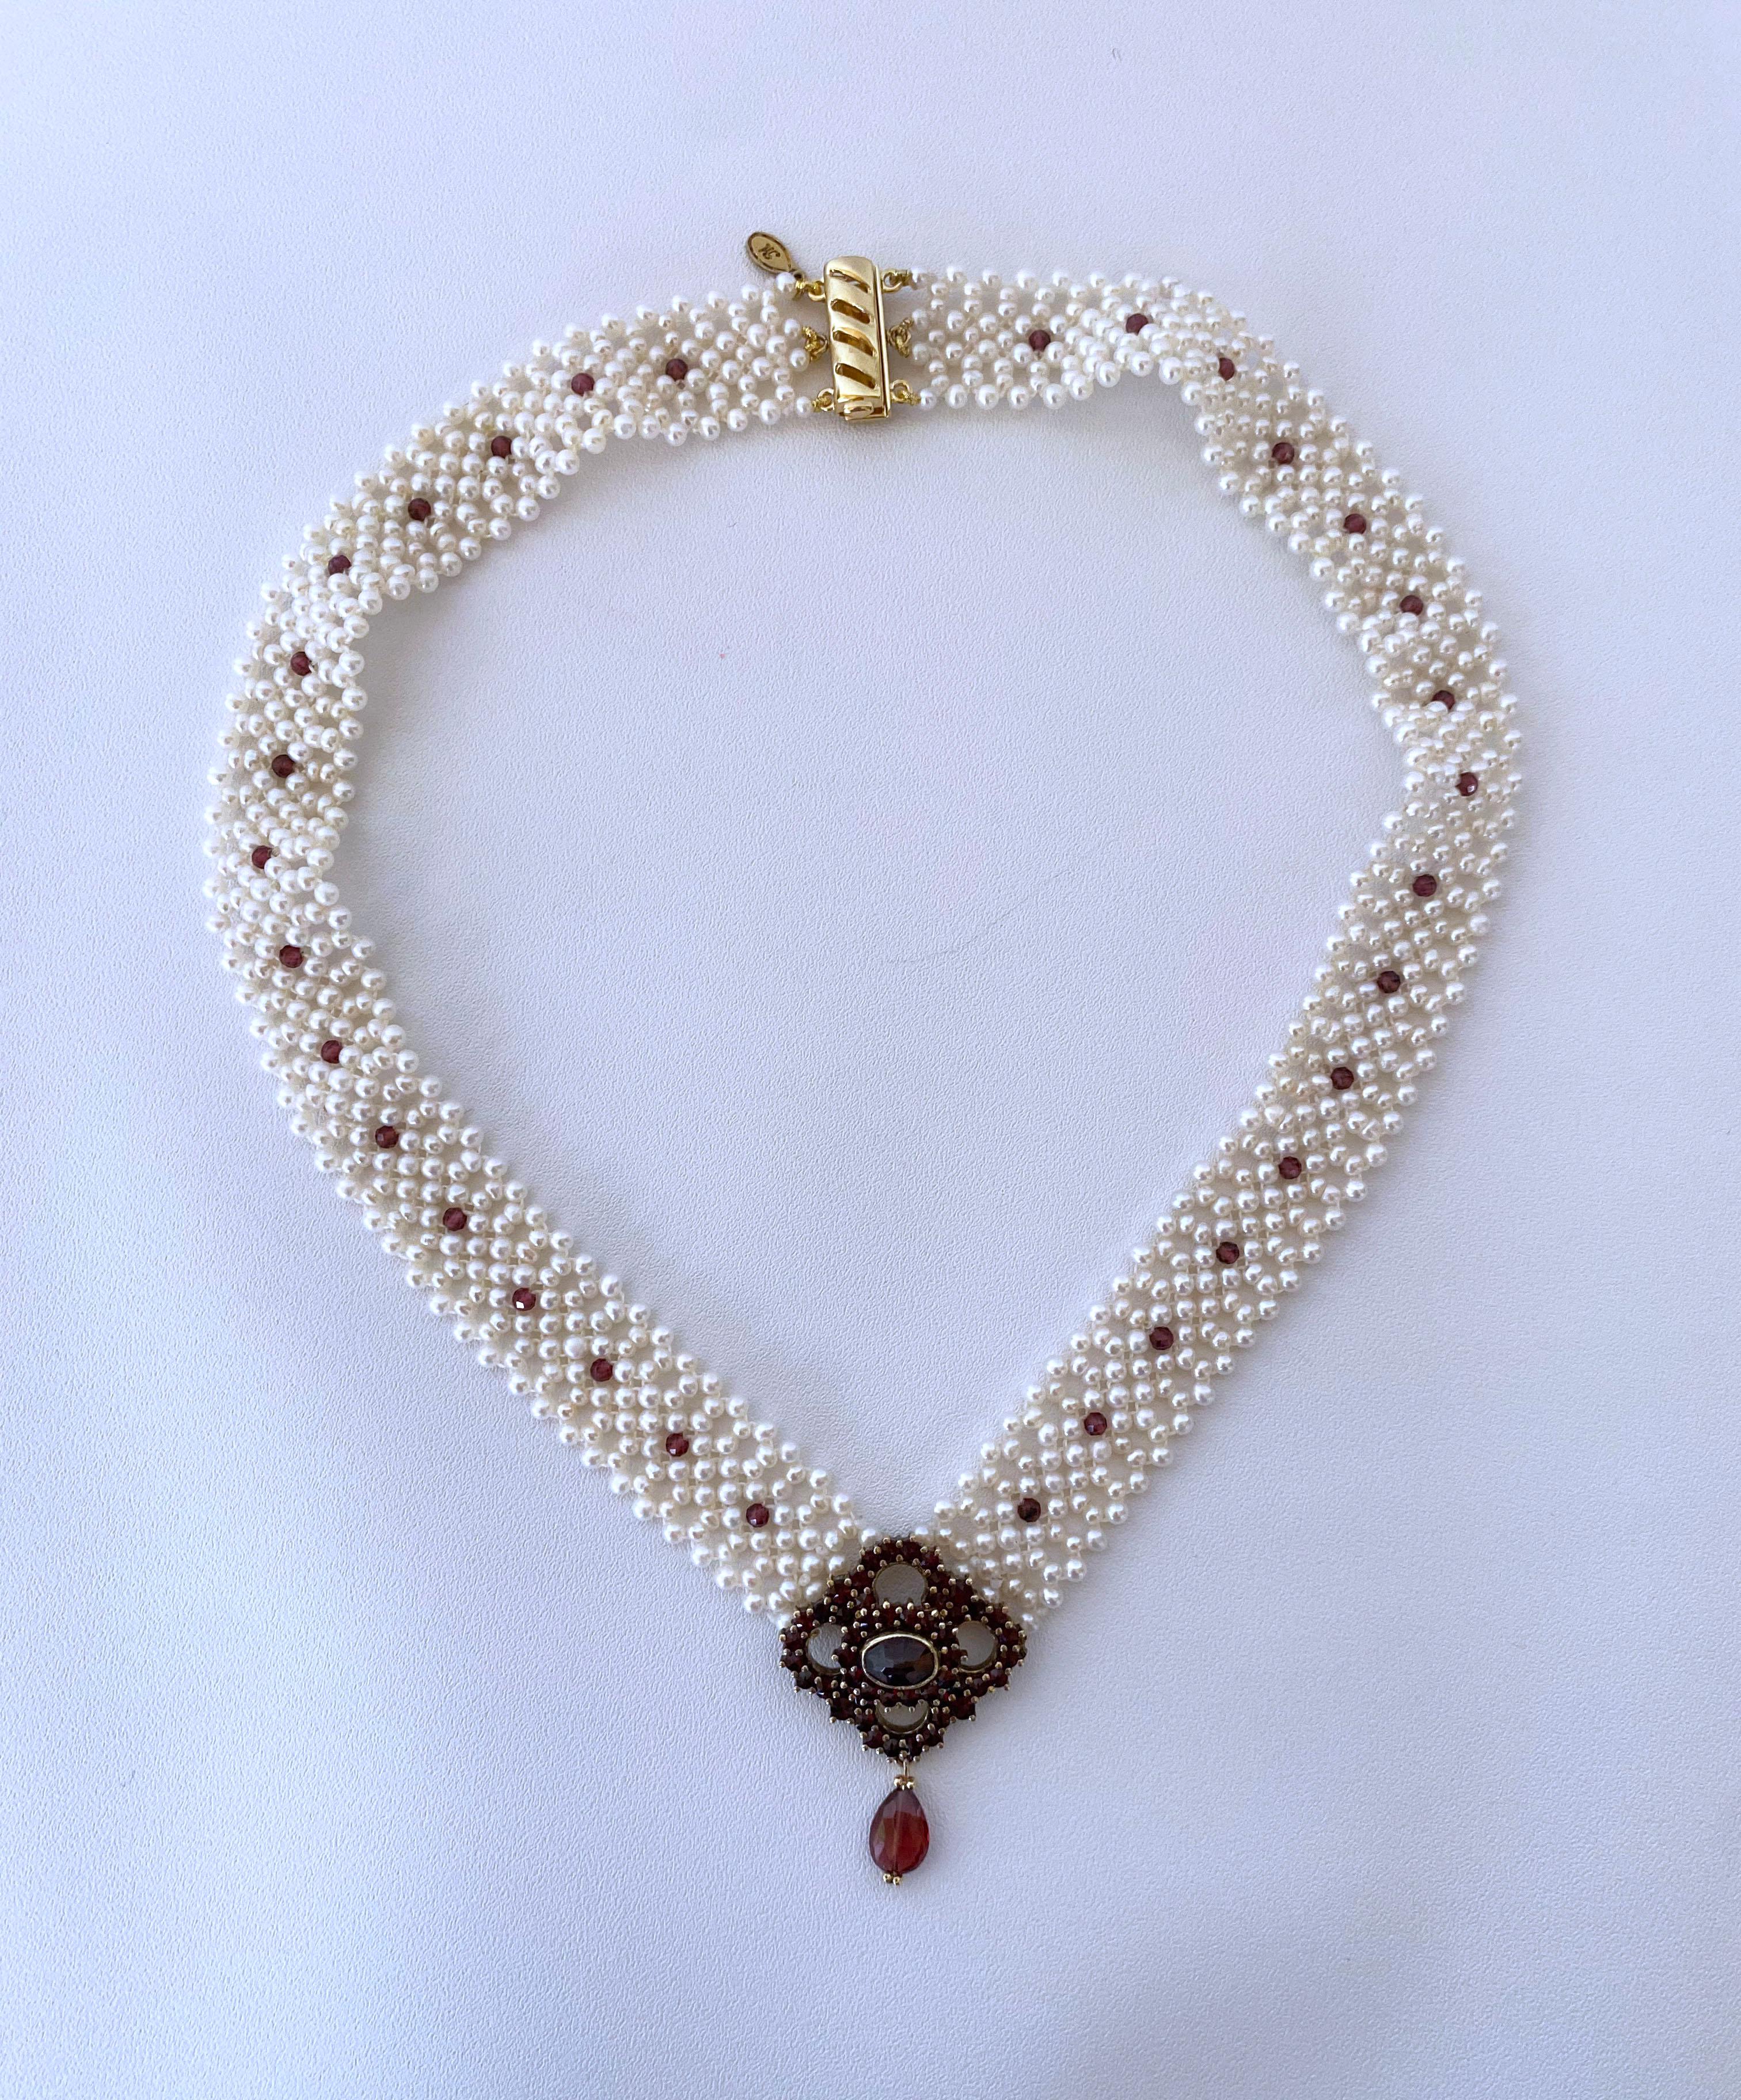 Artisan Marina J. All Pearl Woven Necklace with Vintage Garnet Centerpiece For Sale